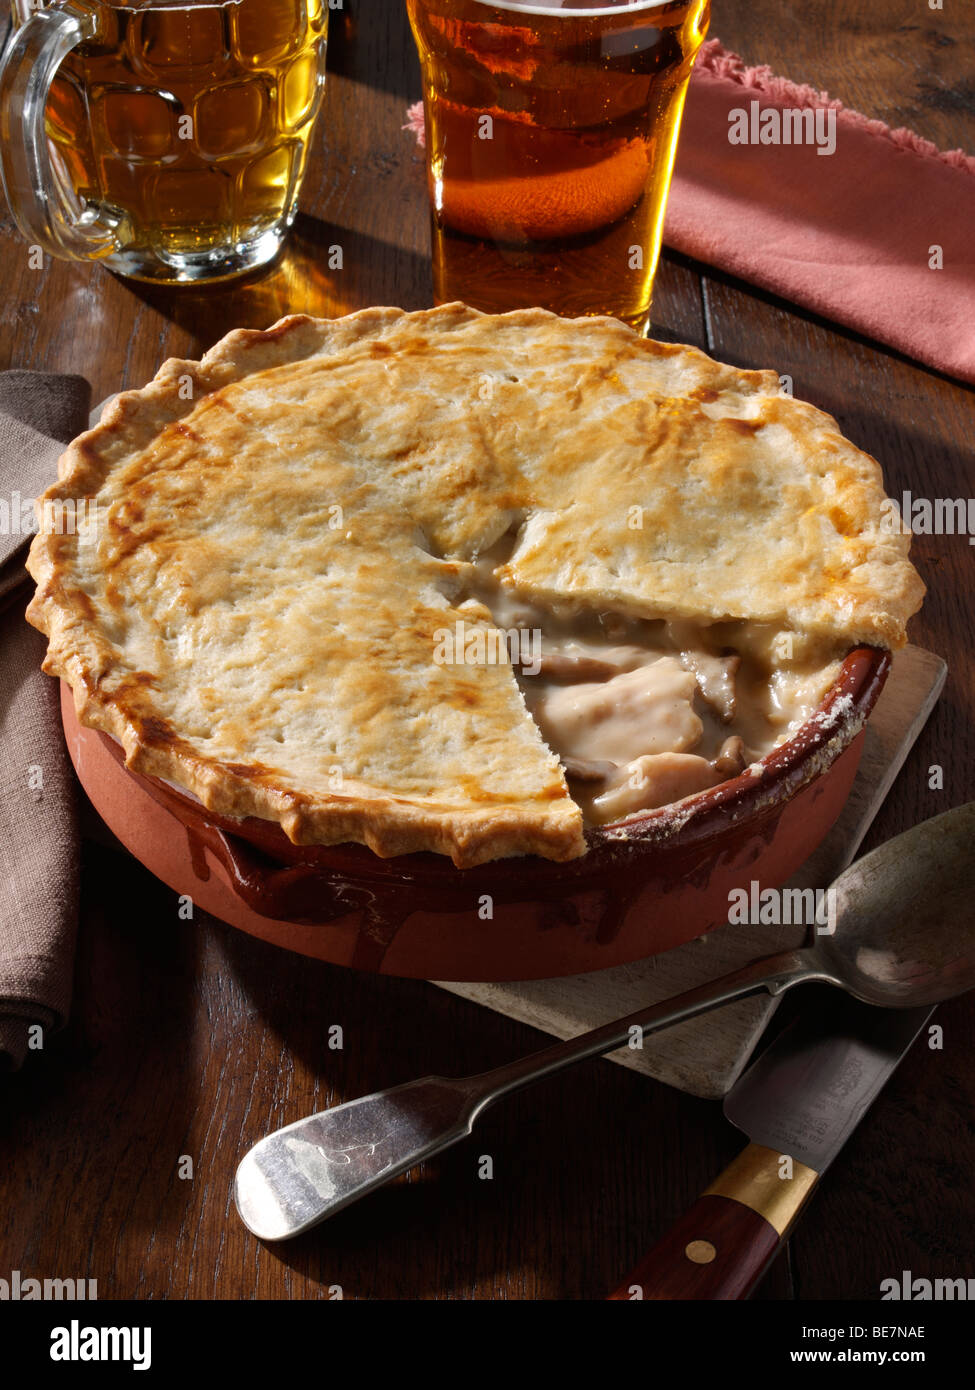 Whole family size chicken pie with runner beans and beer in a table setting Stock Photo